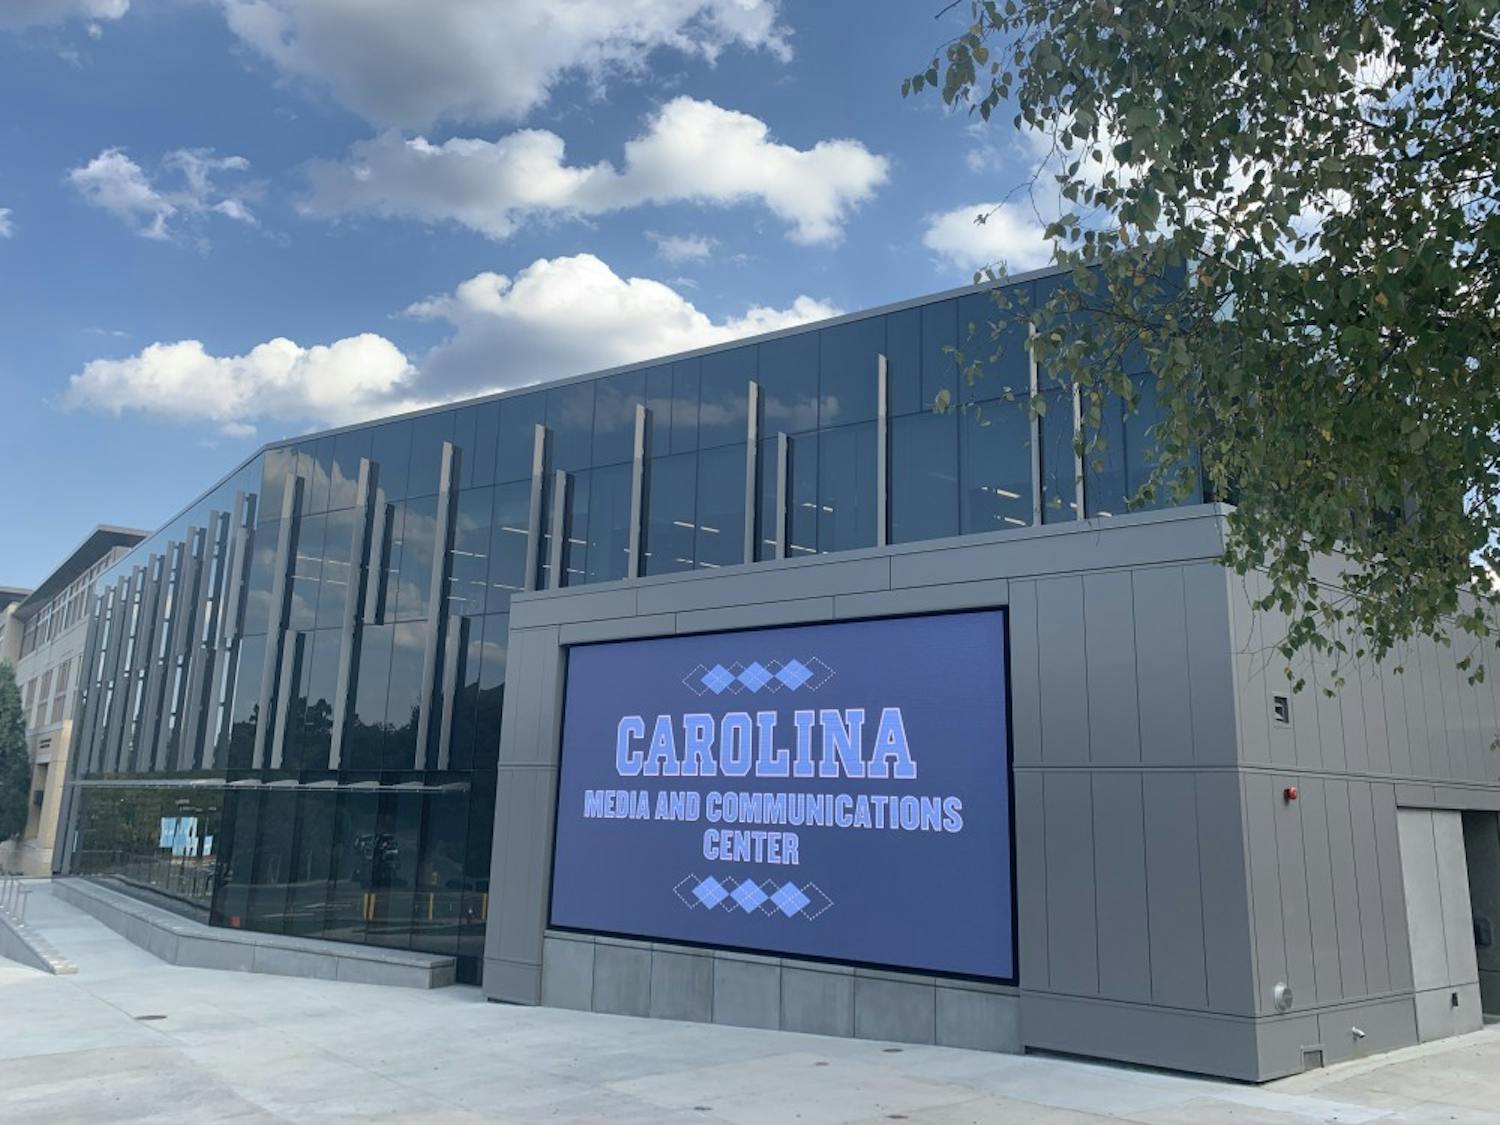 The Media and Communications Center opened at the start of the 2019-2020 academic year. Positioned directly beside the Smith Center, it will aim to foster new opportunities for media members including students, students athletes, and members of the athletics department. 